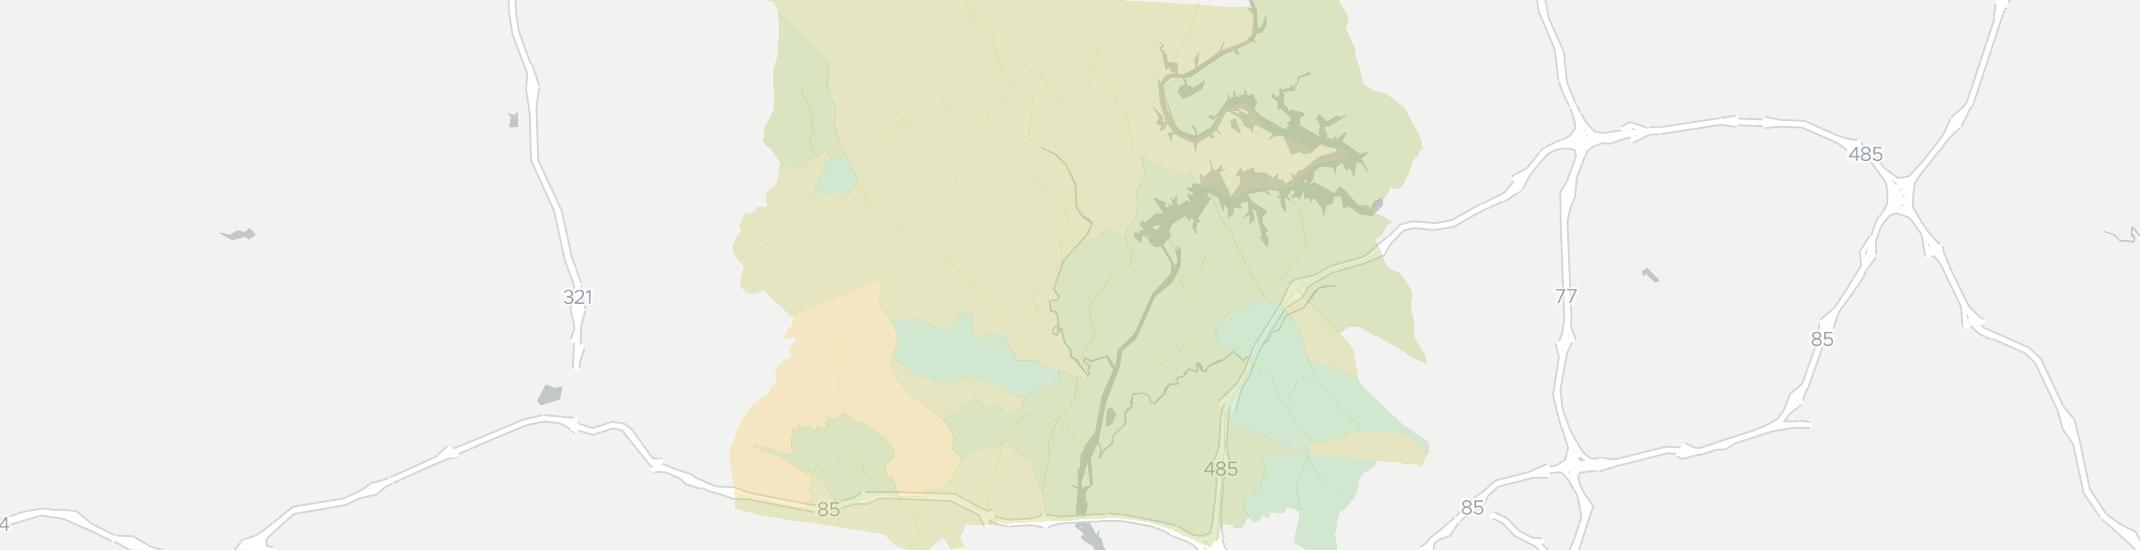 Mount Holly Internet Competition Map. Click for interactive map